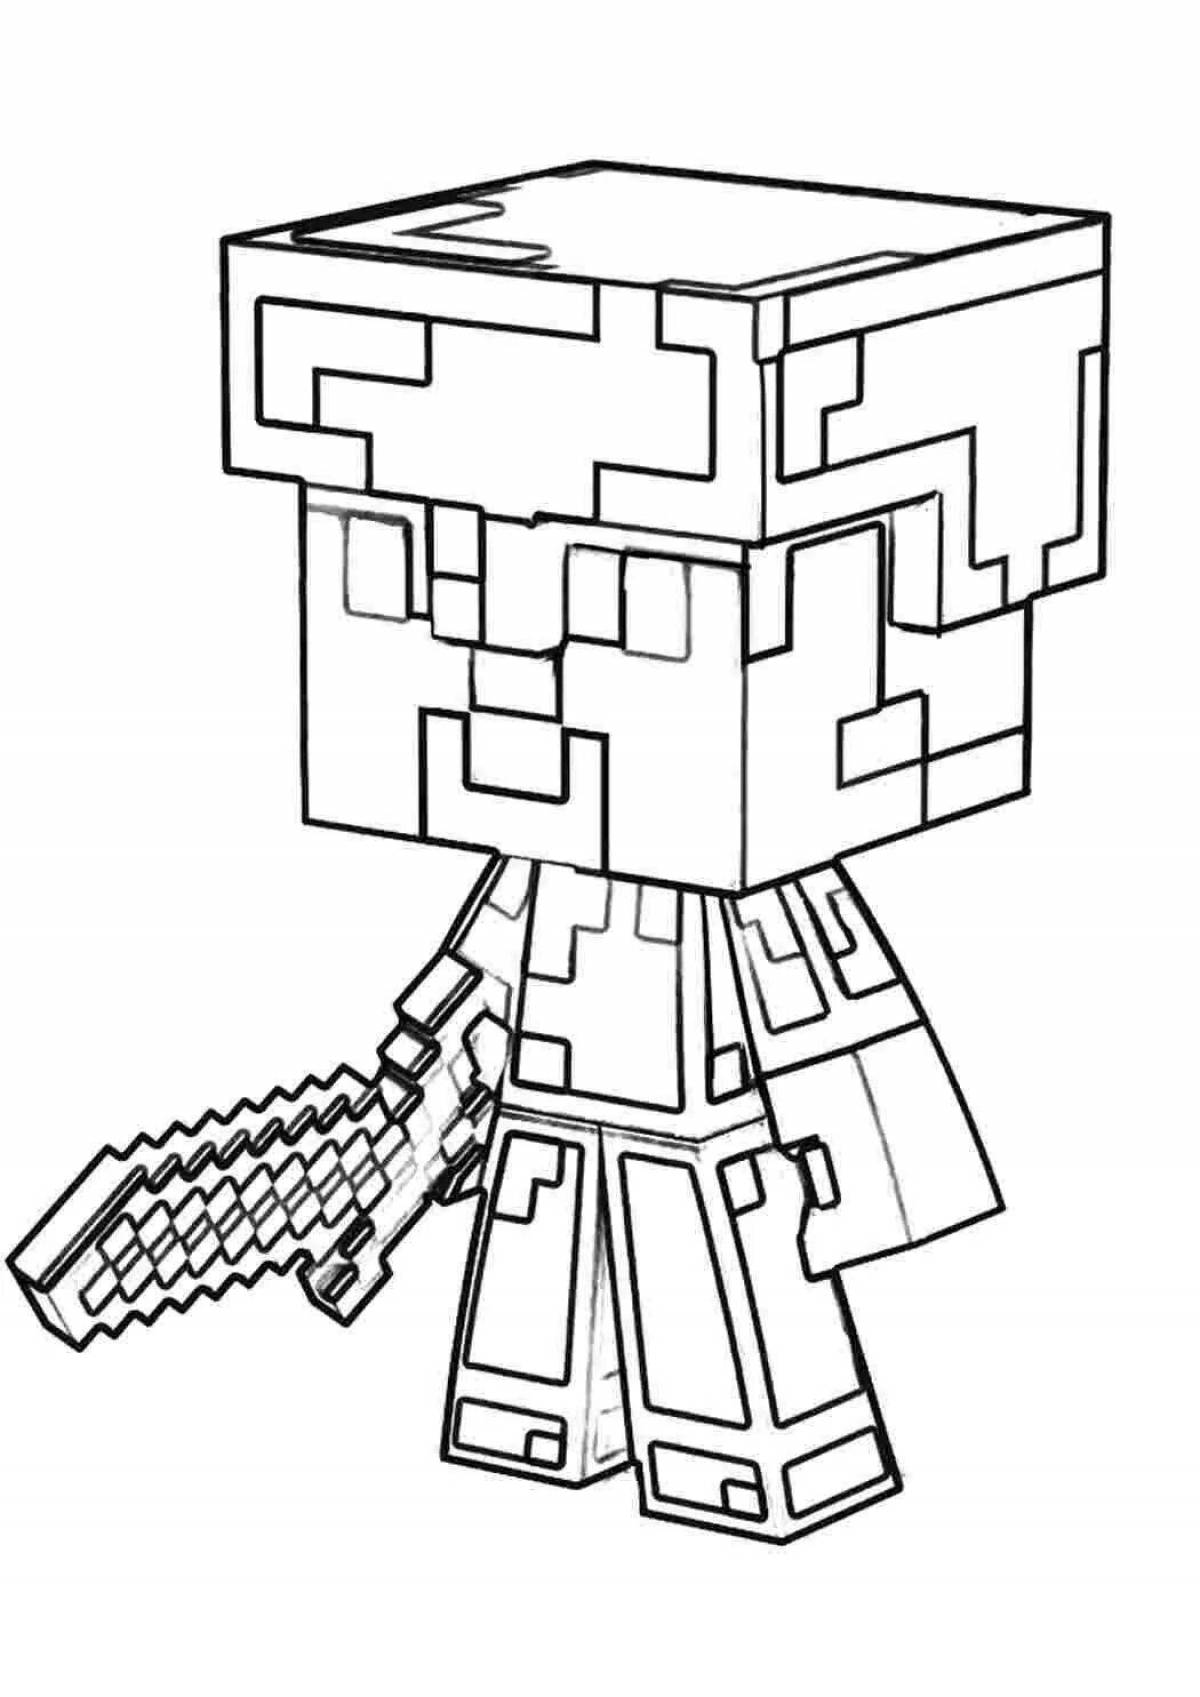 Live minecraft dog coloring page